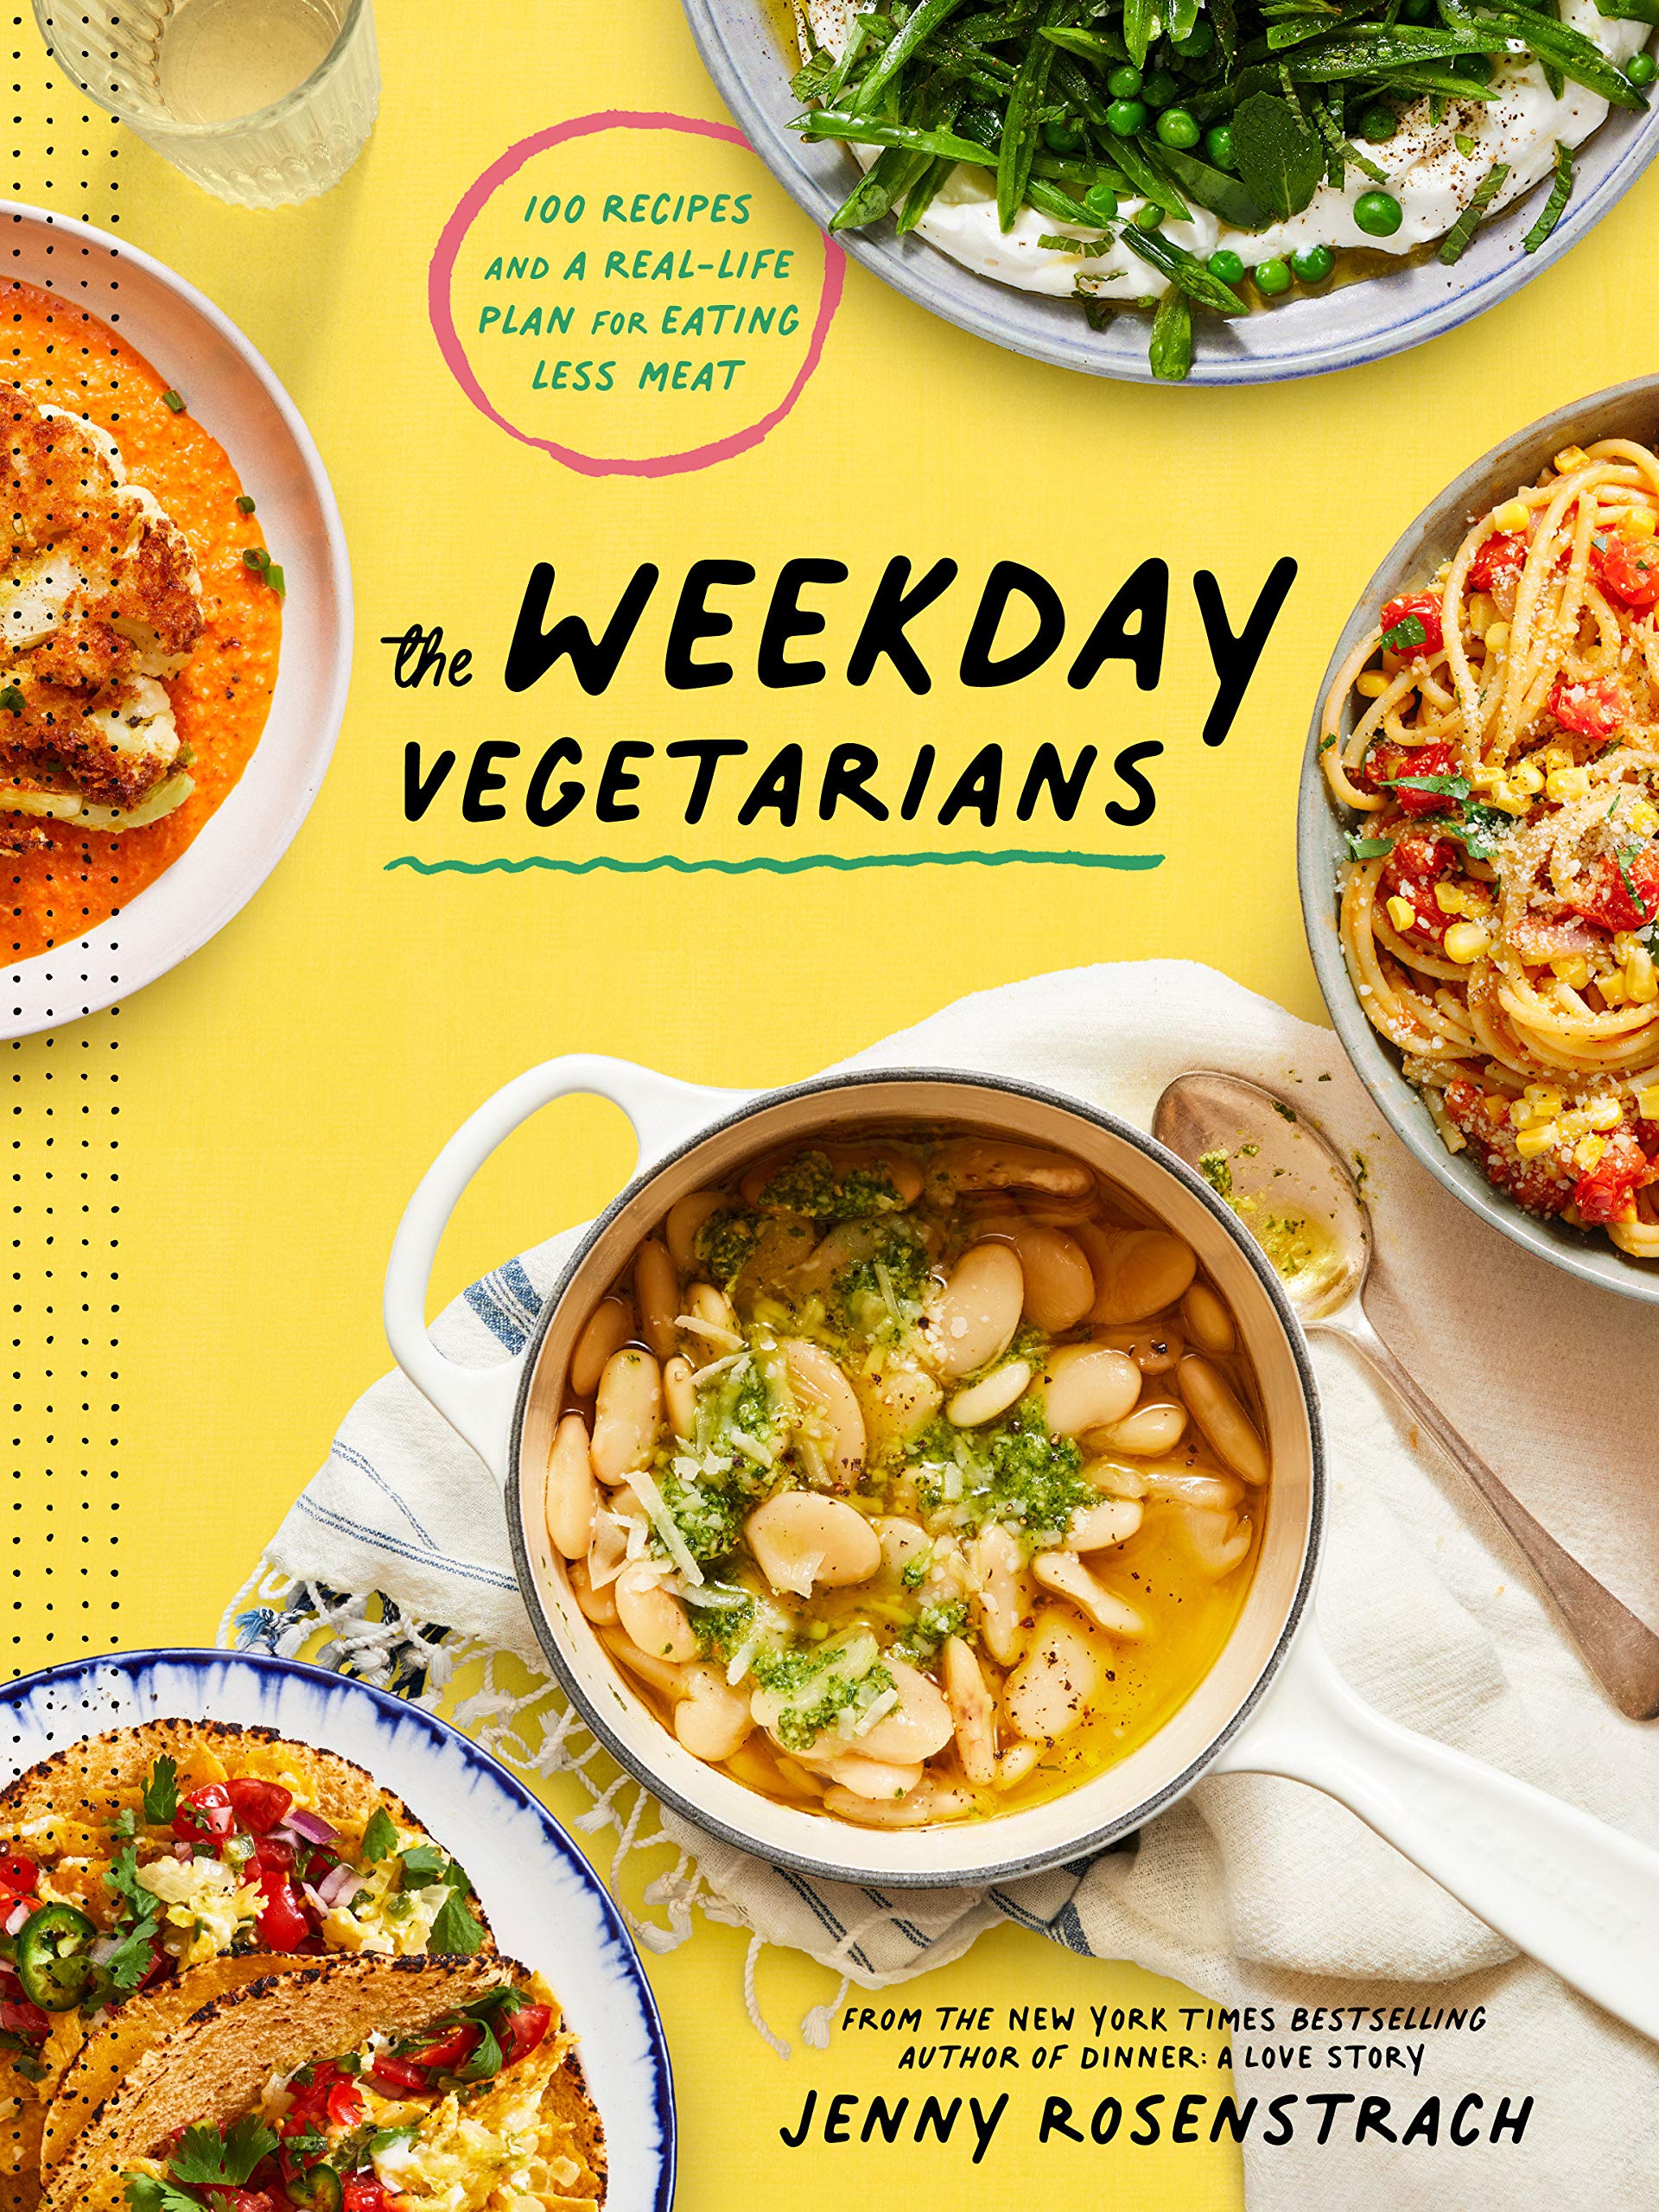 The Weekday Vegetarians: 100 Recipes and a Real-Life Plan for Eating Less Meat (Jenny Rosenstrach)